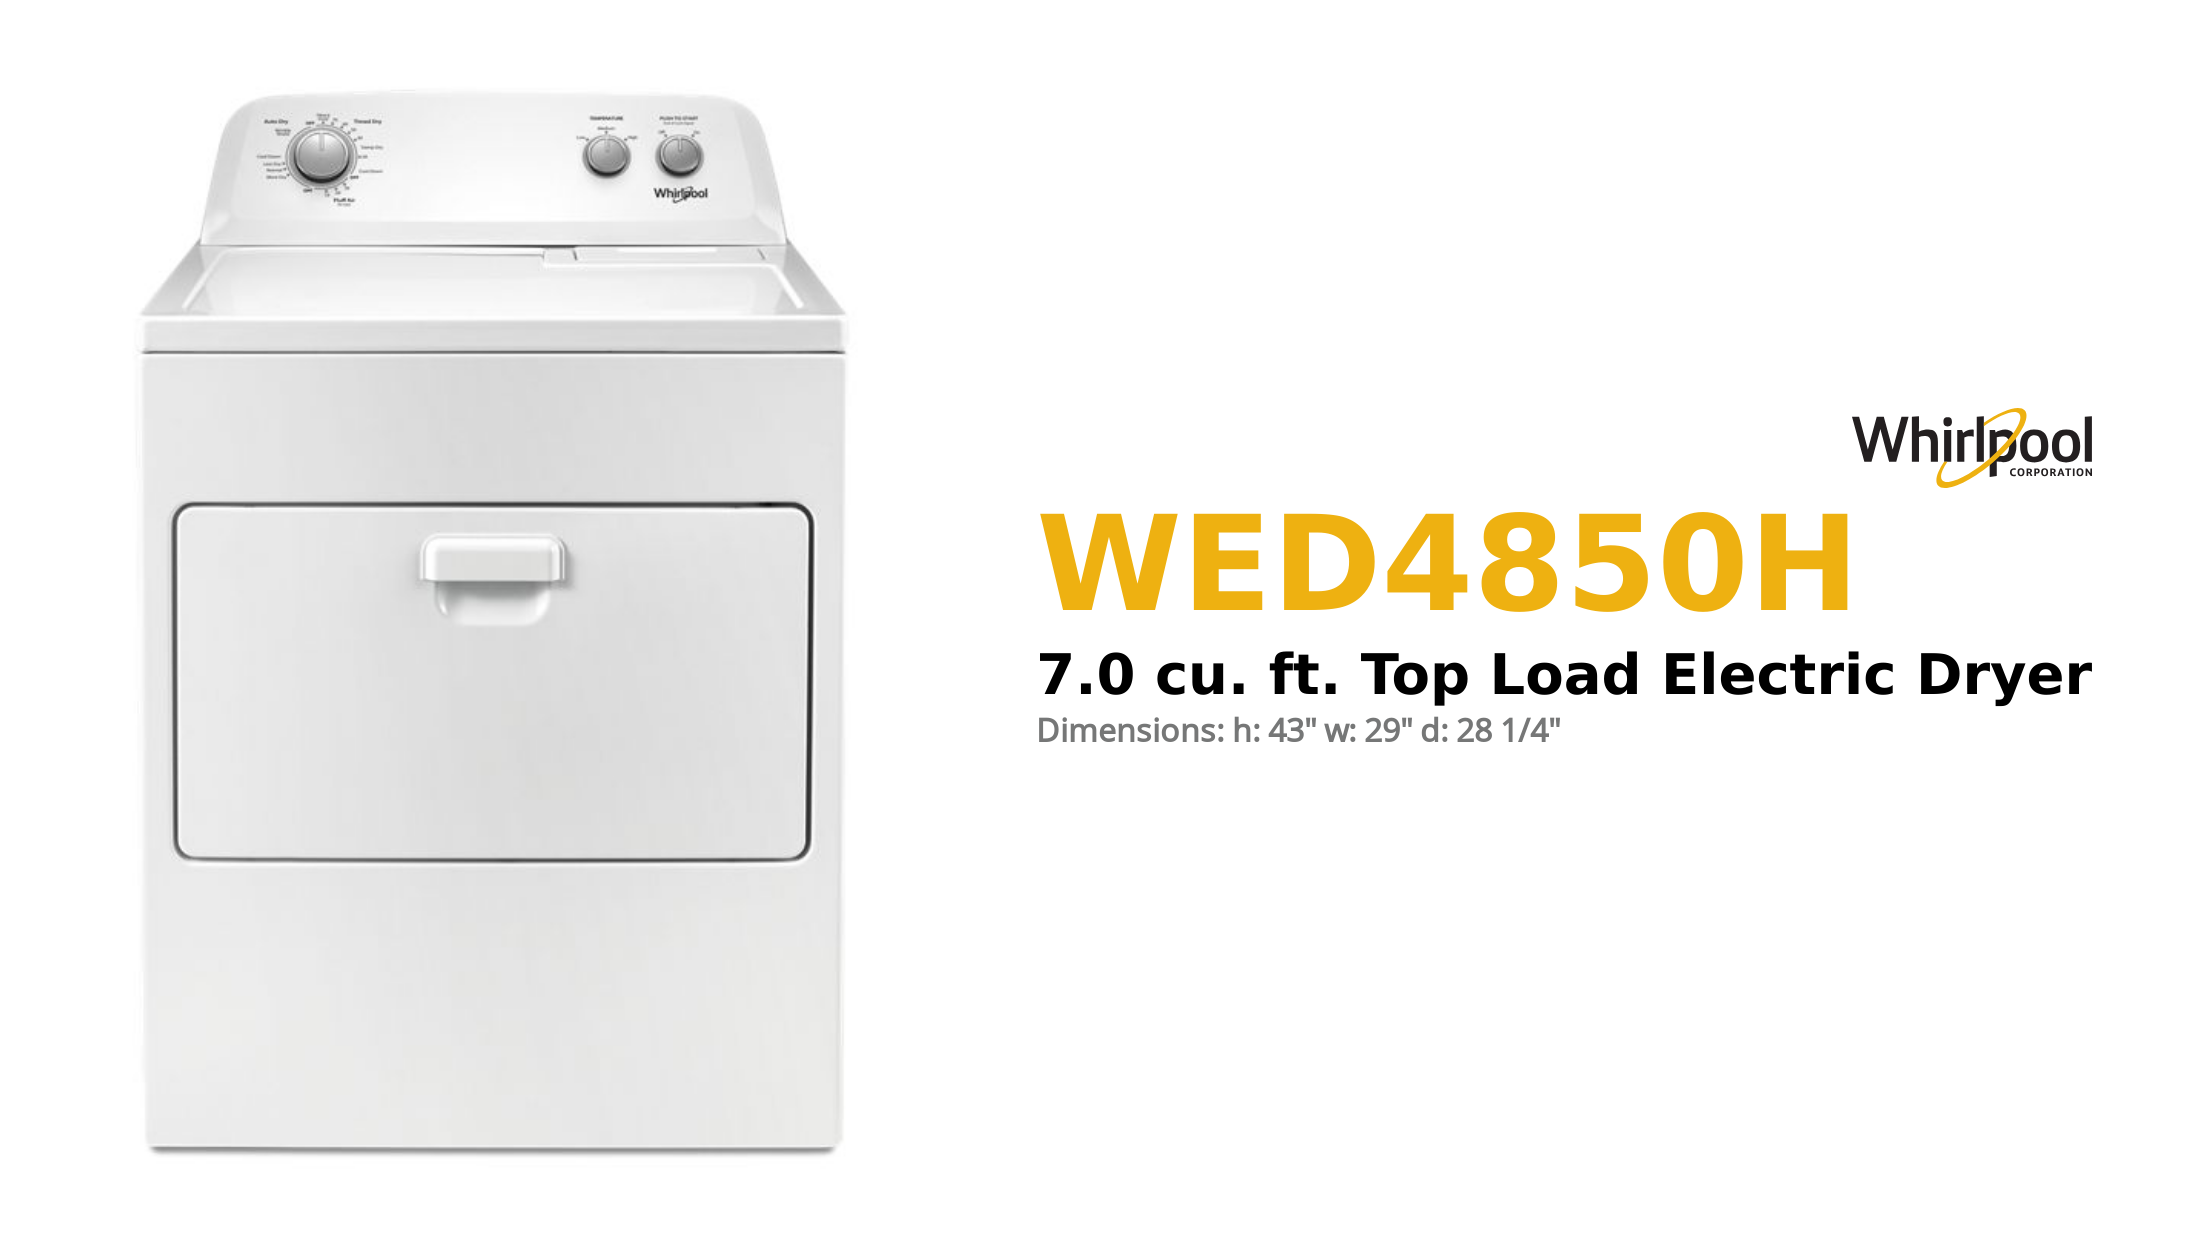 Whirlpool® 7.0 cu. ft. Top Load Electric Dryer